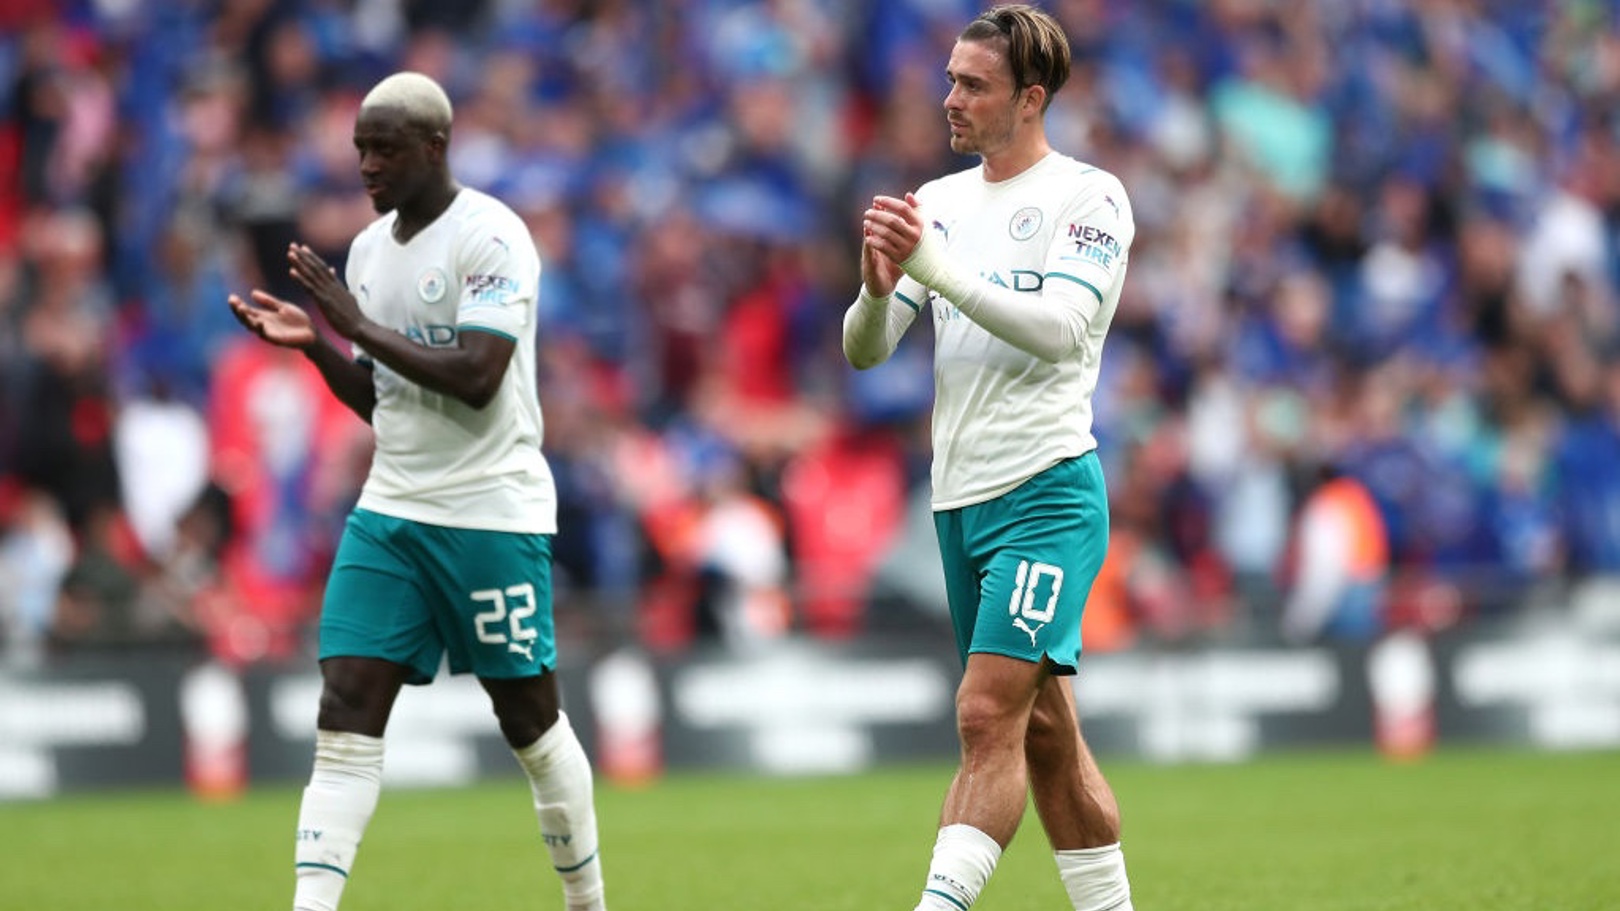 ALL OVER: Grealish and Mendy show their appreciation to the fans at Wembley.